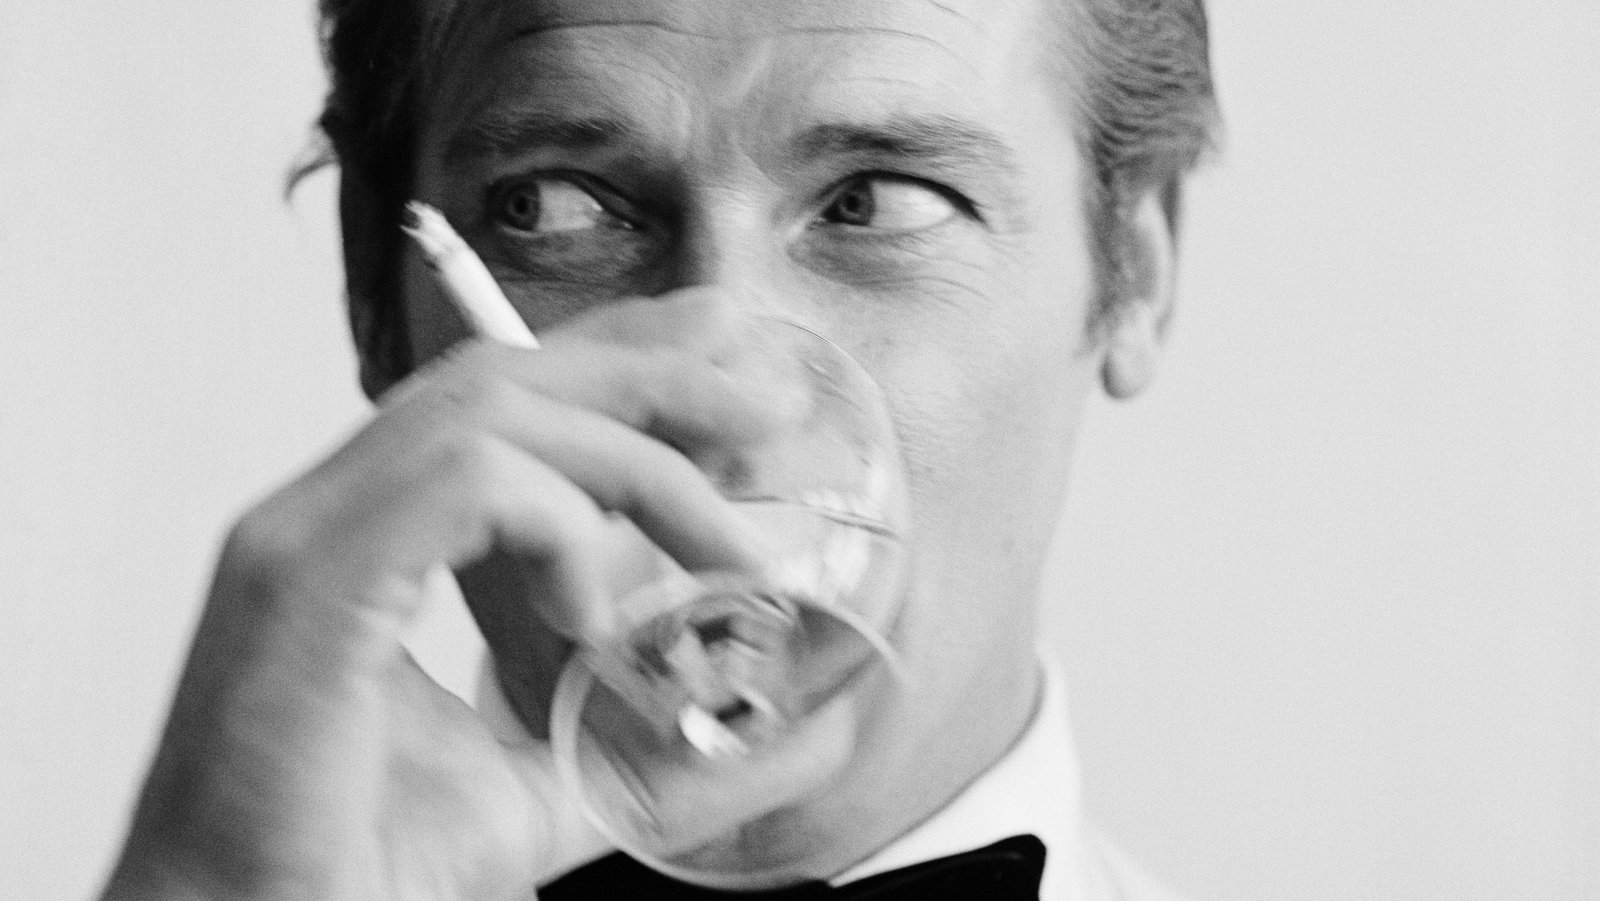 who was the first james bond actor